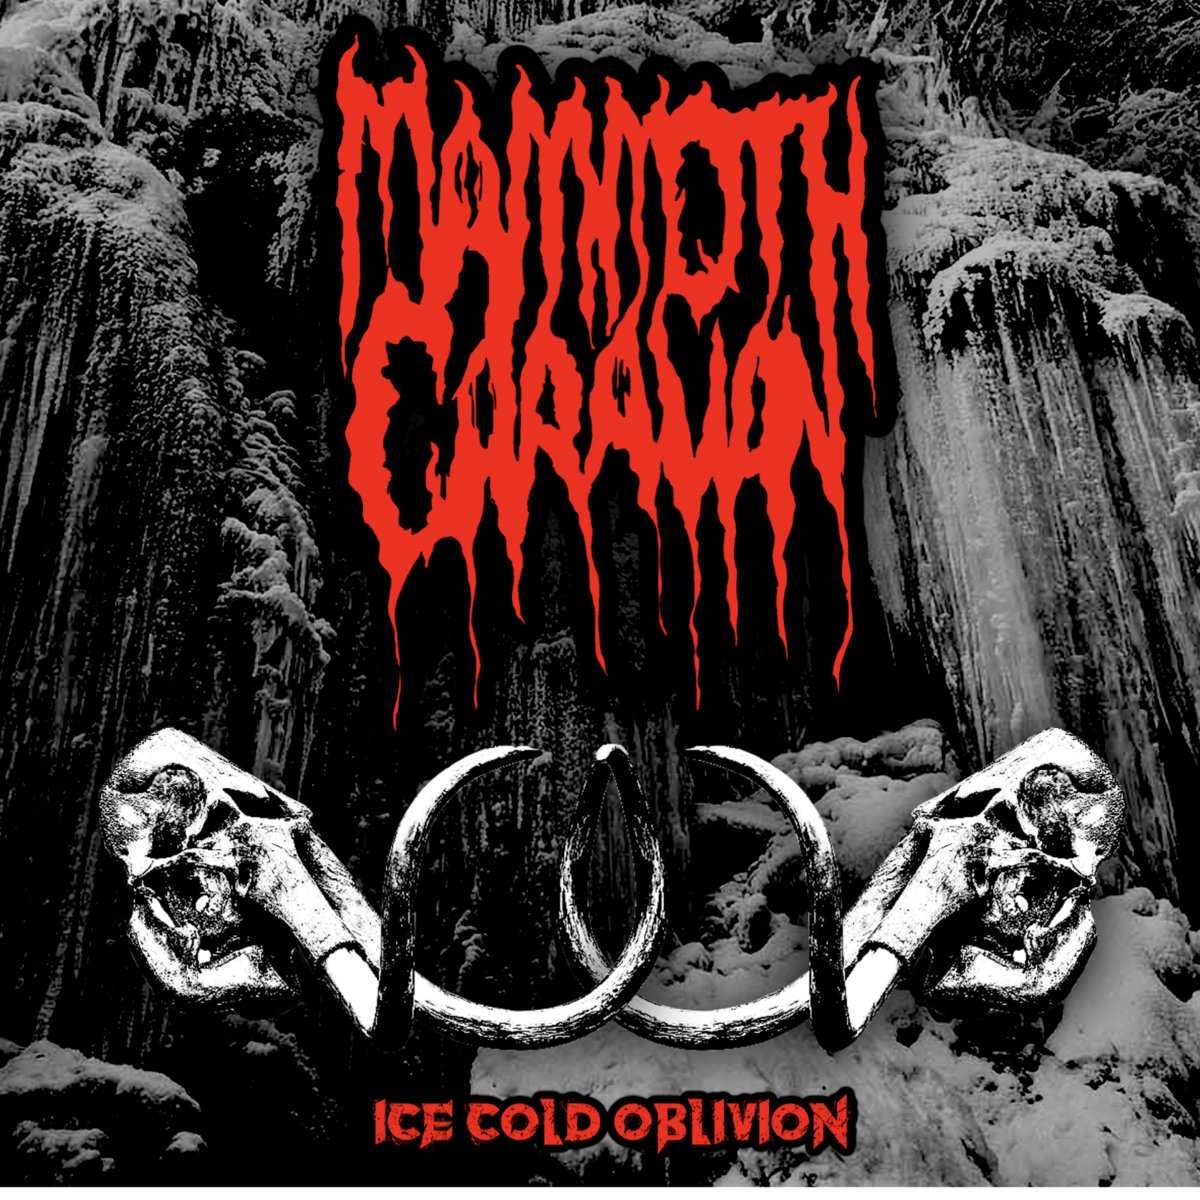 Cover art for Ice Cold Oblivion by Mammoth Caravan. Two mammoth skulls in a cave interlocking tusks with red text that reads Mammoth Caravan, Ice Cold Oblivion.